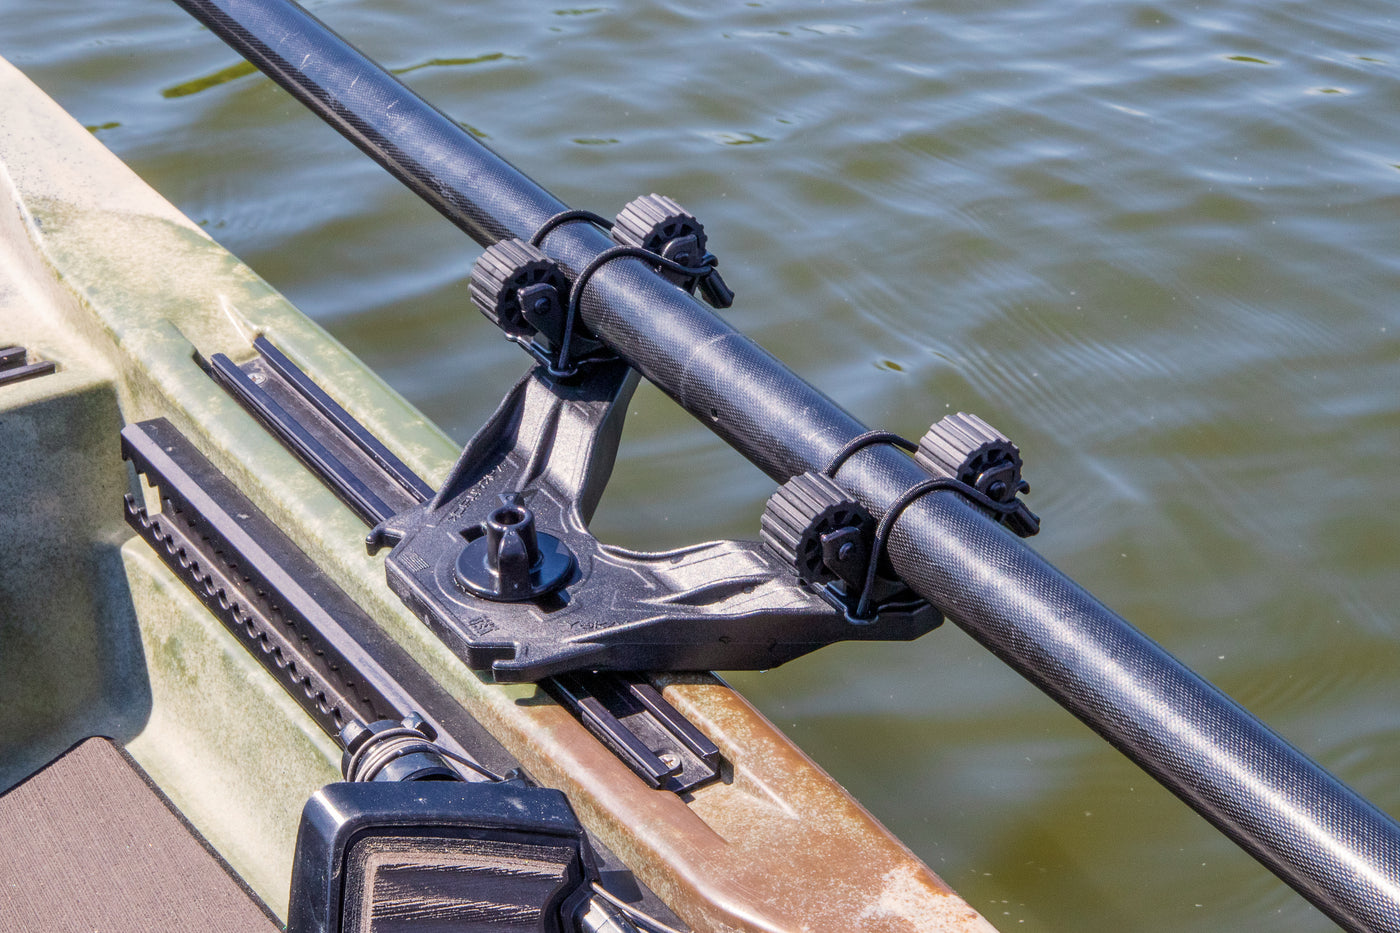 YakAttack DoubleHeader with Dual RotoGrip Paddle Holders – Fishing Online